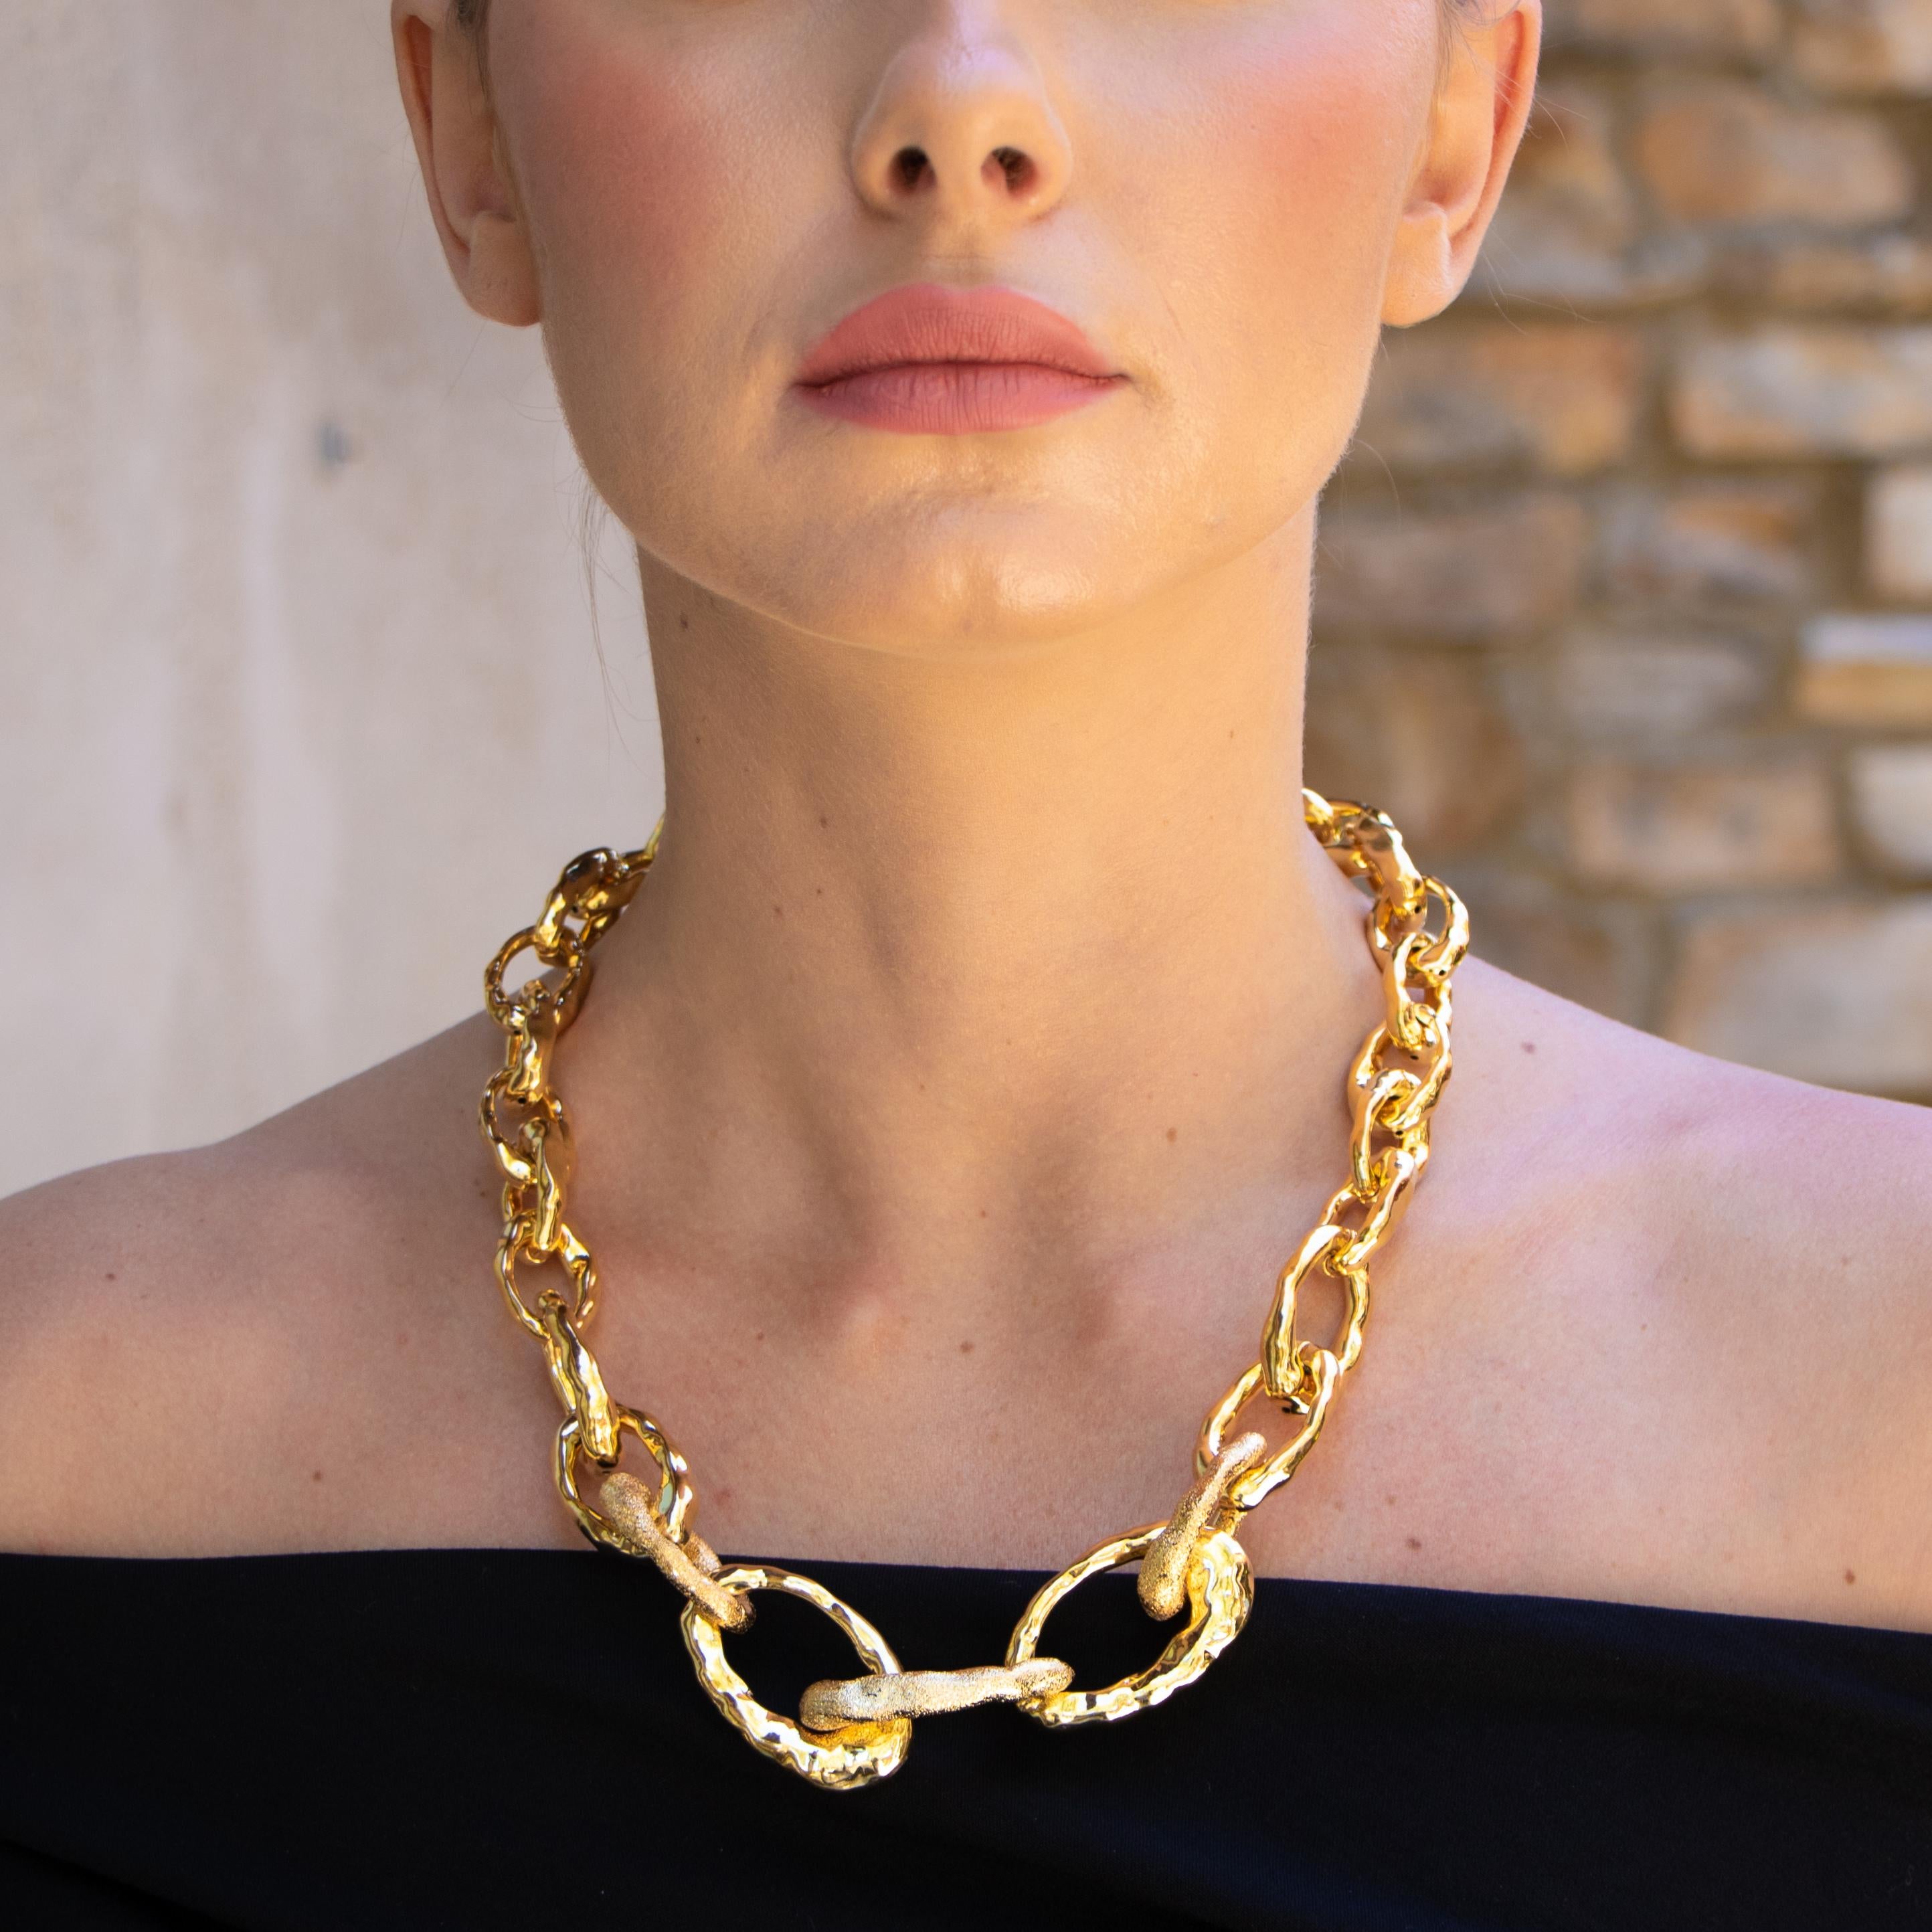 Beautiful golden necklace with textured hoops and smooth hoops. This will be a favorite and will be well loved by all. 
Designer: Cristina Sabatini
18K Yellow Gold Infused Plating on Base Metal
Length: 18-22 Inches
